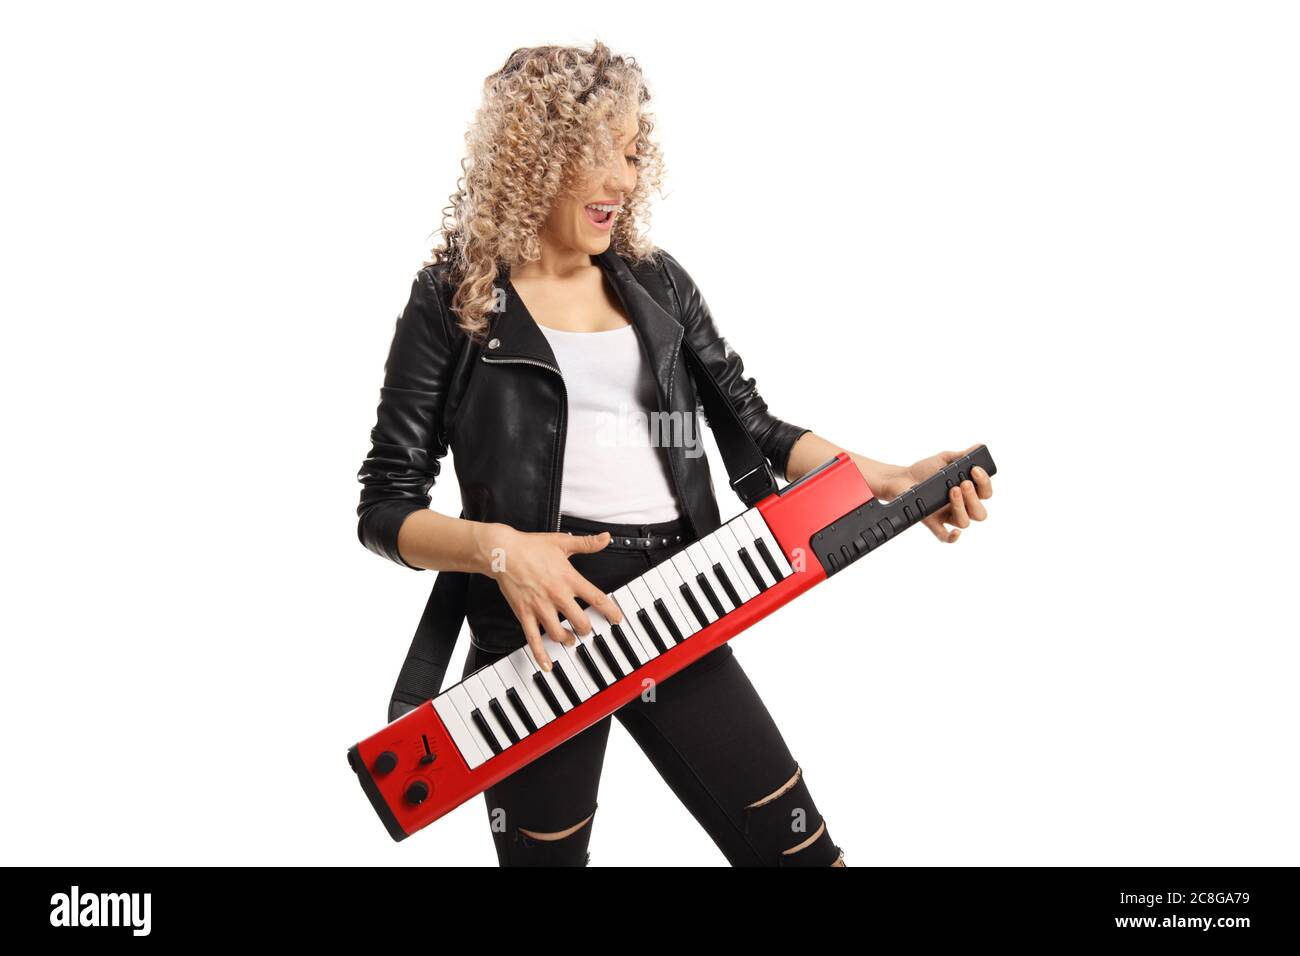 Woman playing a red keytar synthesizer isolated on white background Stock Photo